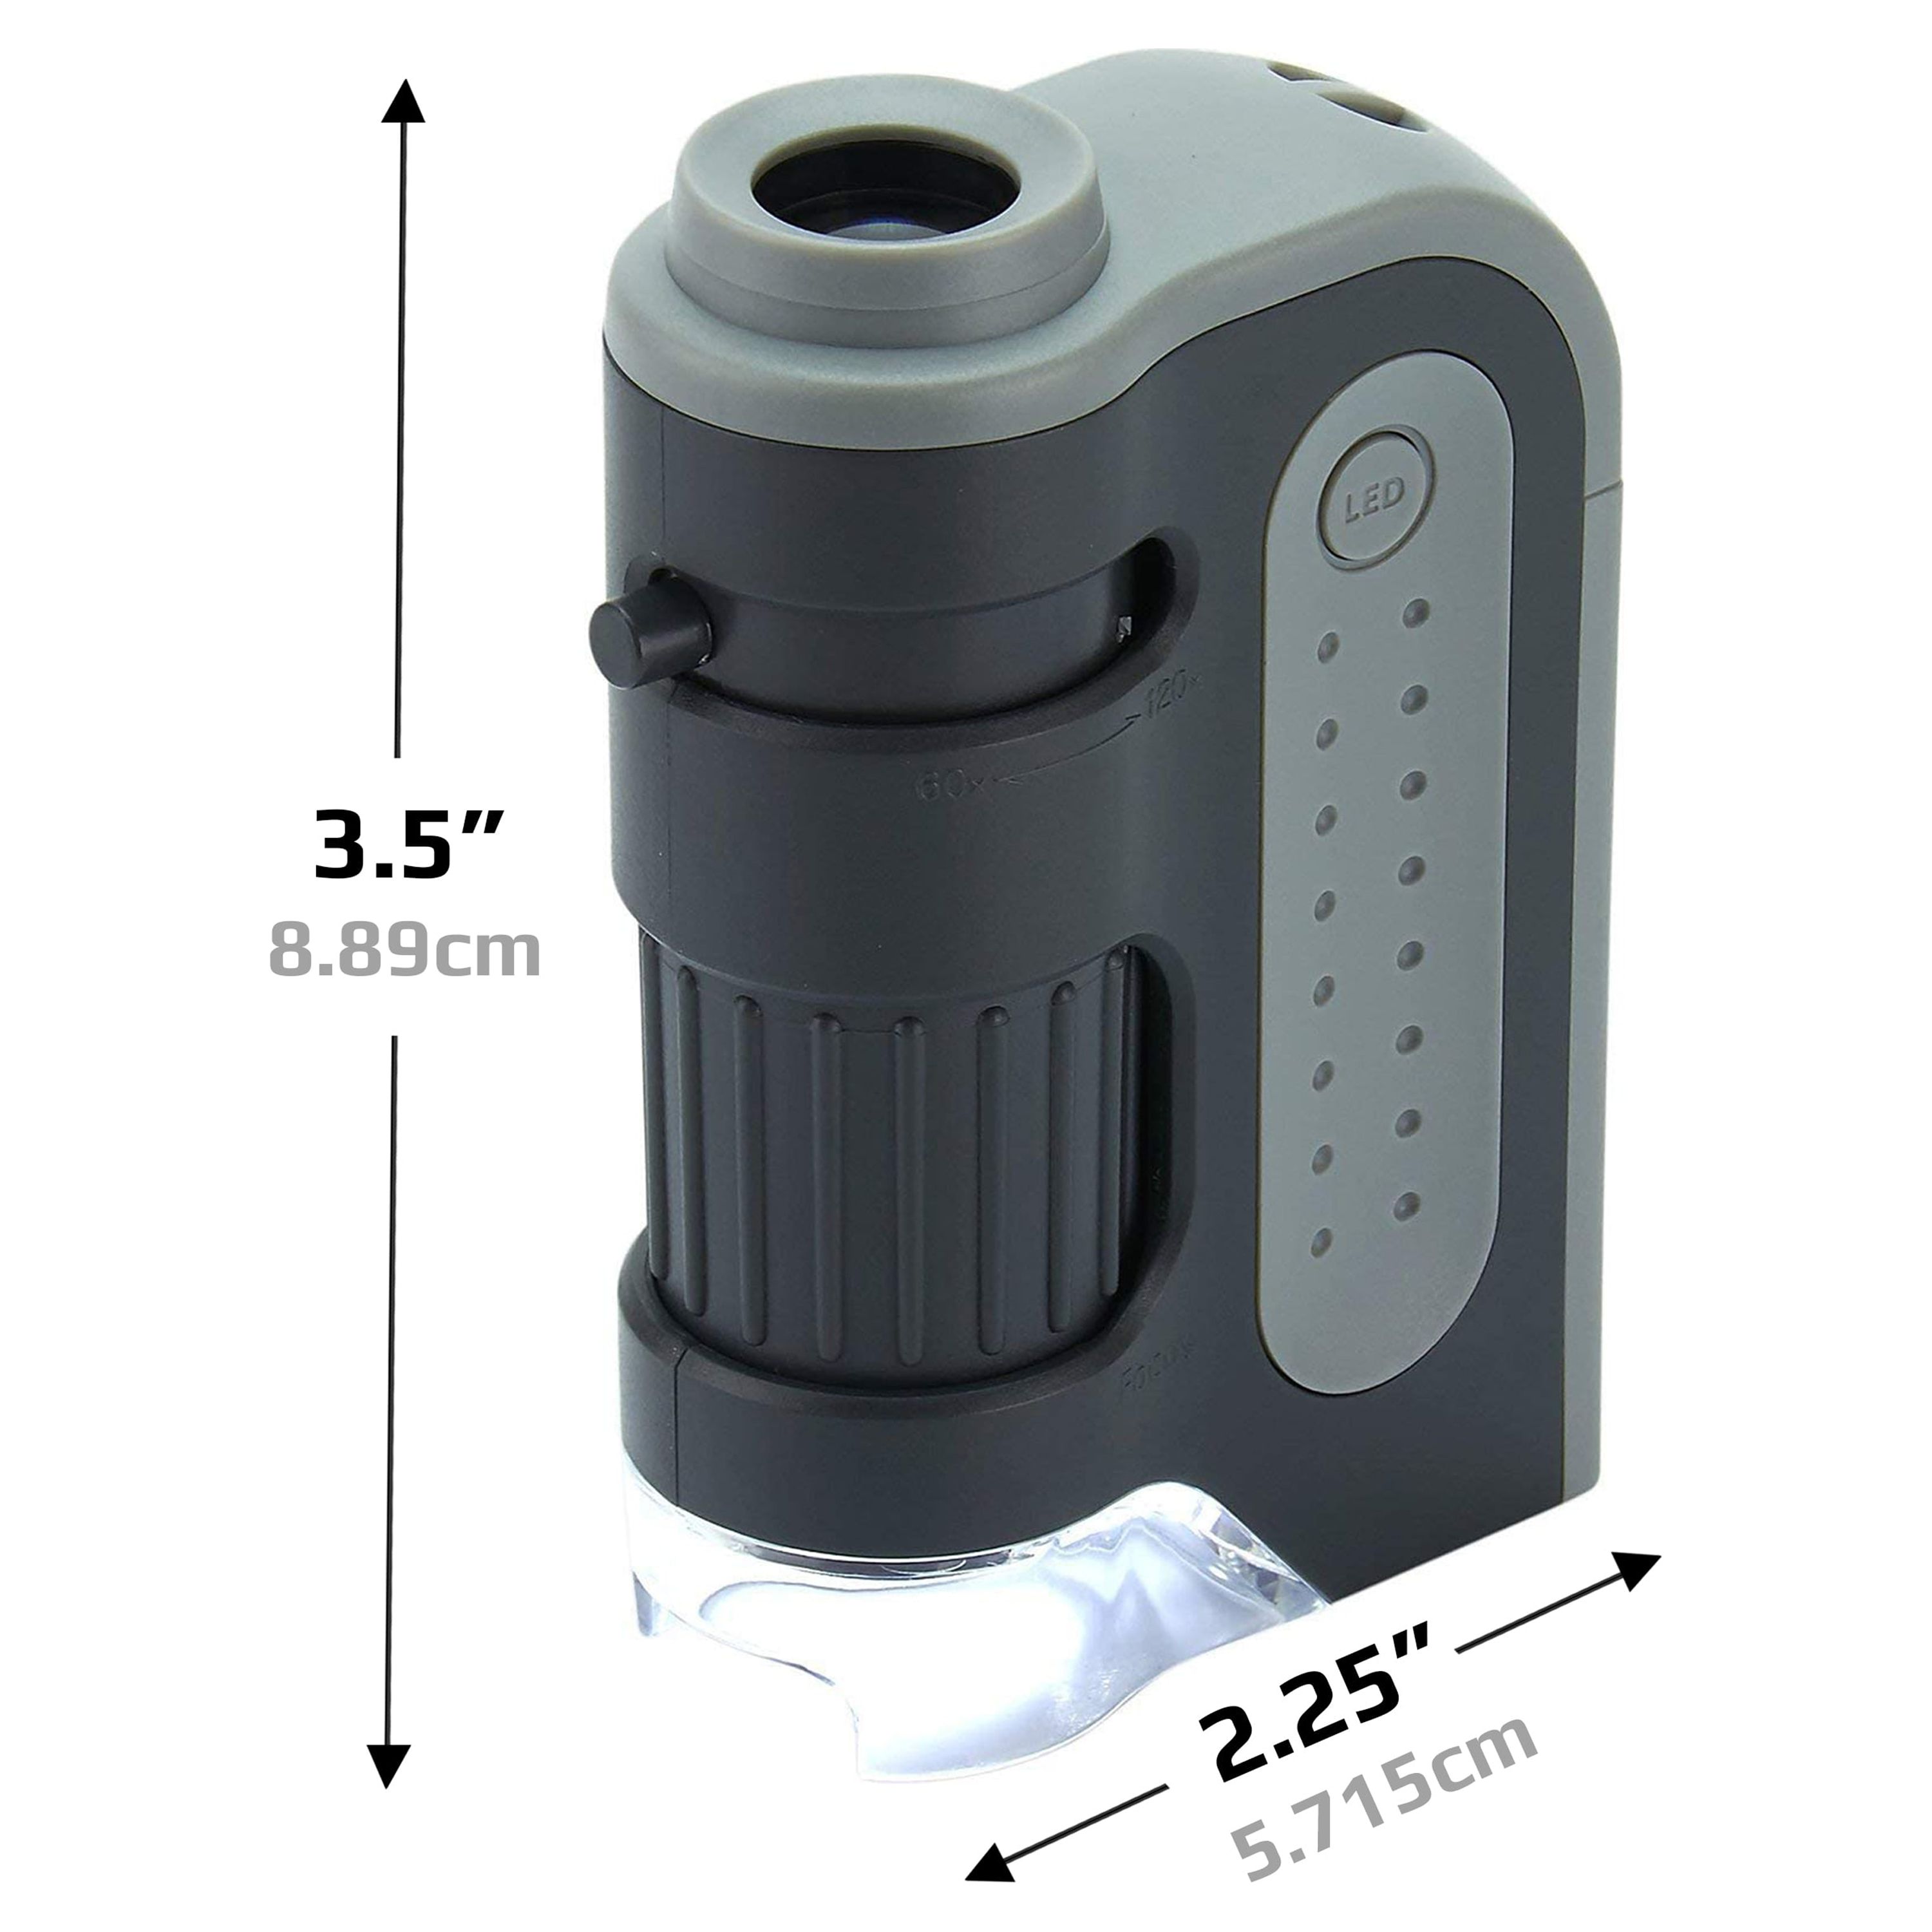 Carson MicroBrite™ Plus 60x - 120x LED Lighted Portable Pocket Microscope for Kids & Adults - image 6 of 9